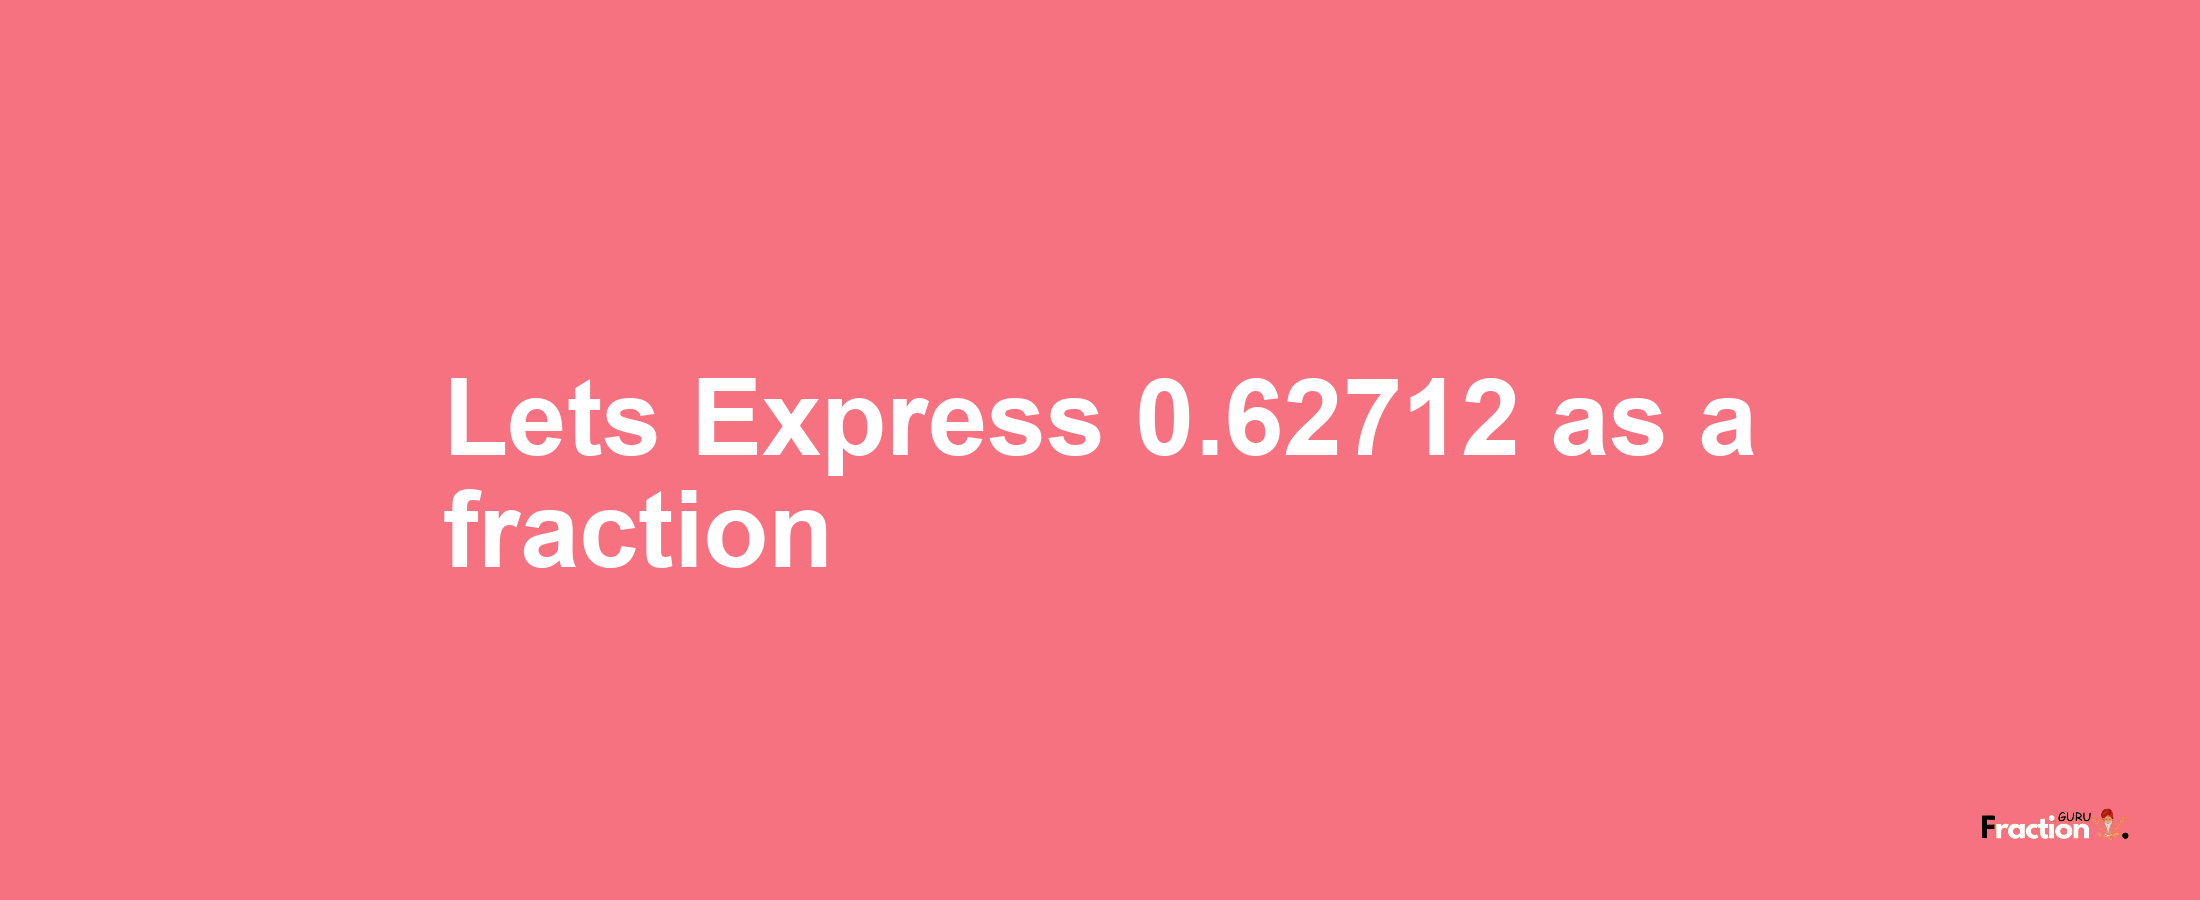 Lets Express 0.62712 as afraction